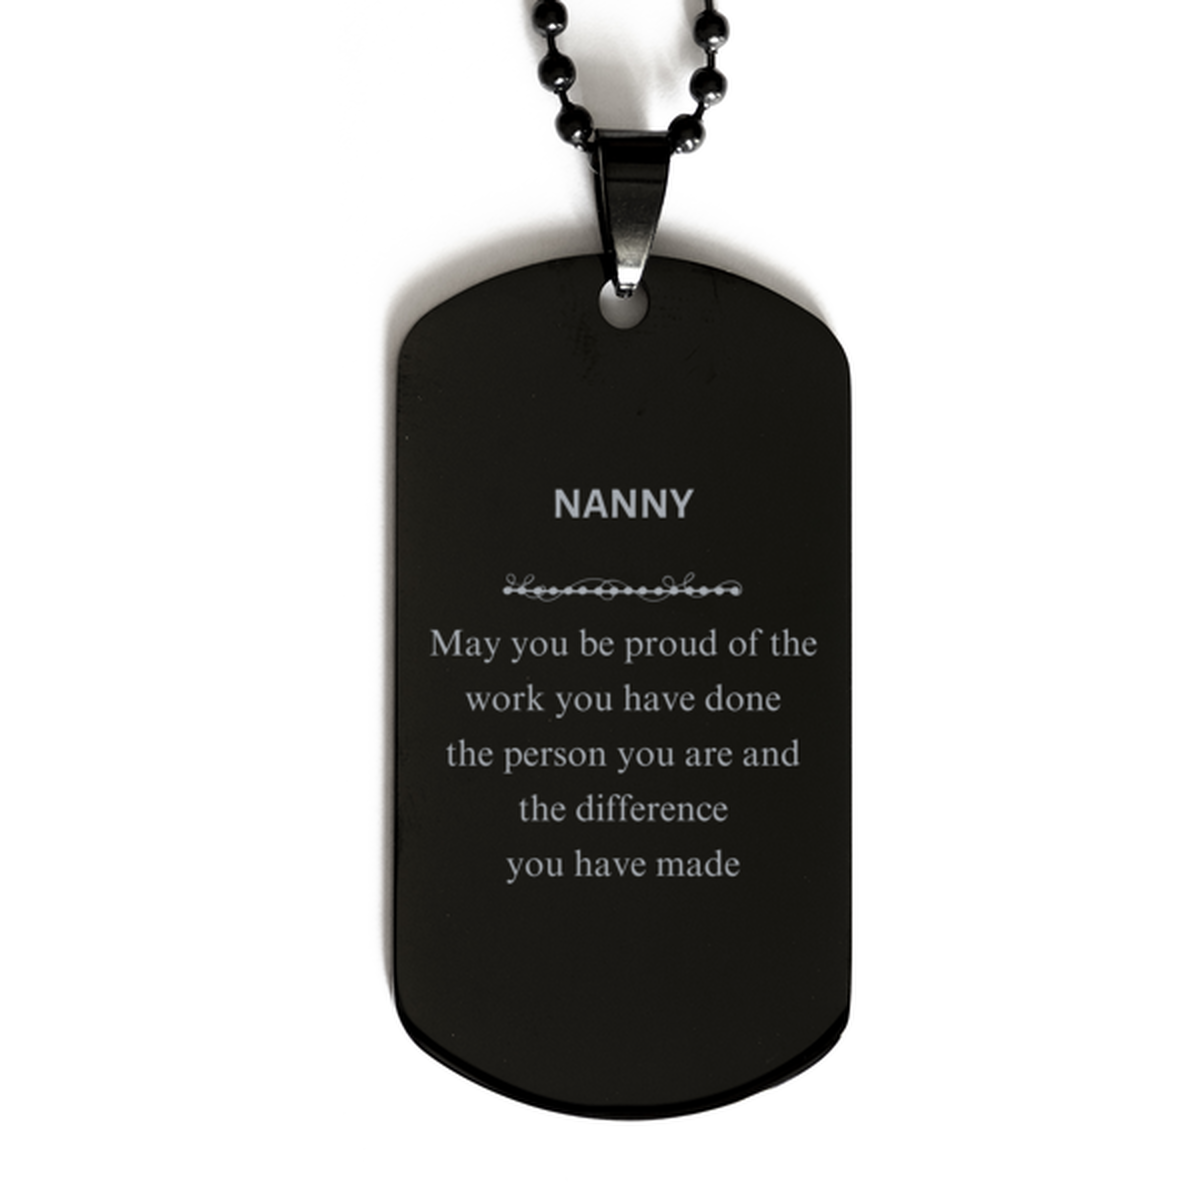 Nanny May you be proud of the work you have done, Retirement Nanny Black Dog Tag for Colleague Appreciation Gifts Amazing for Nanny